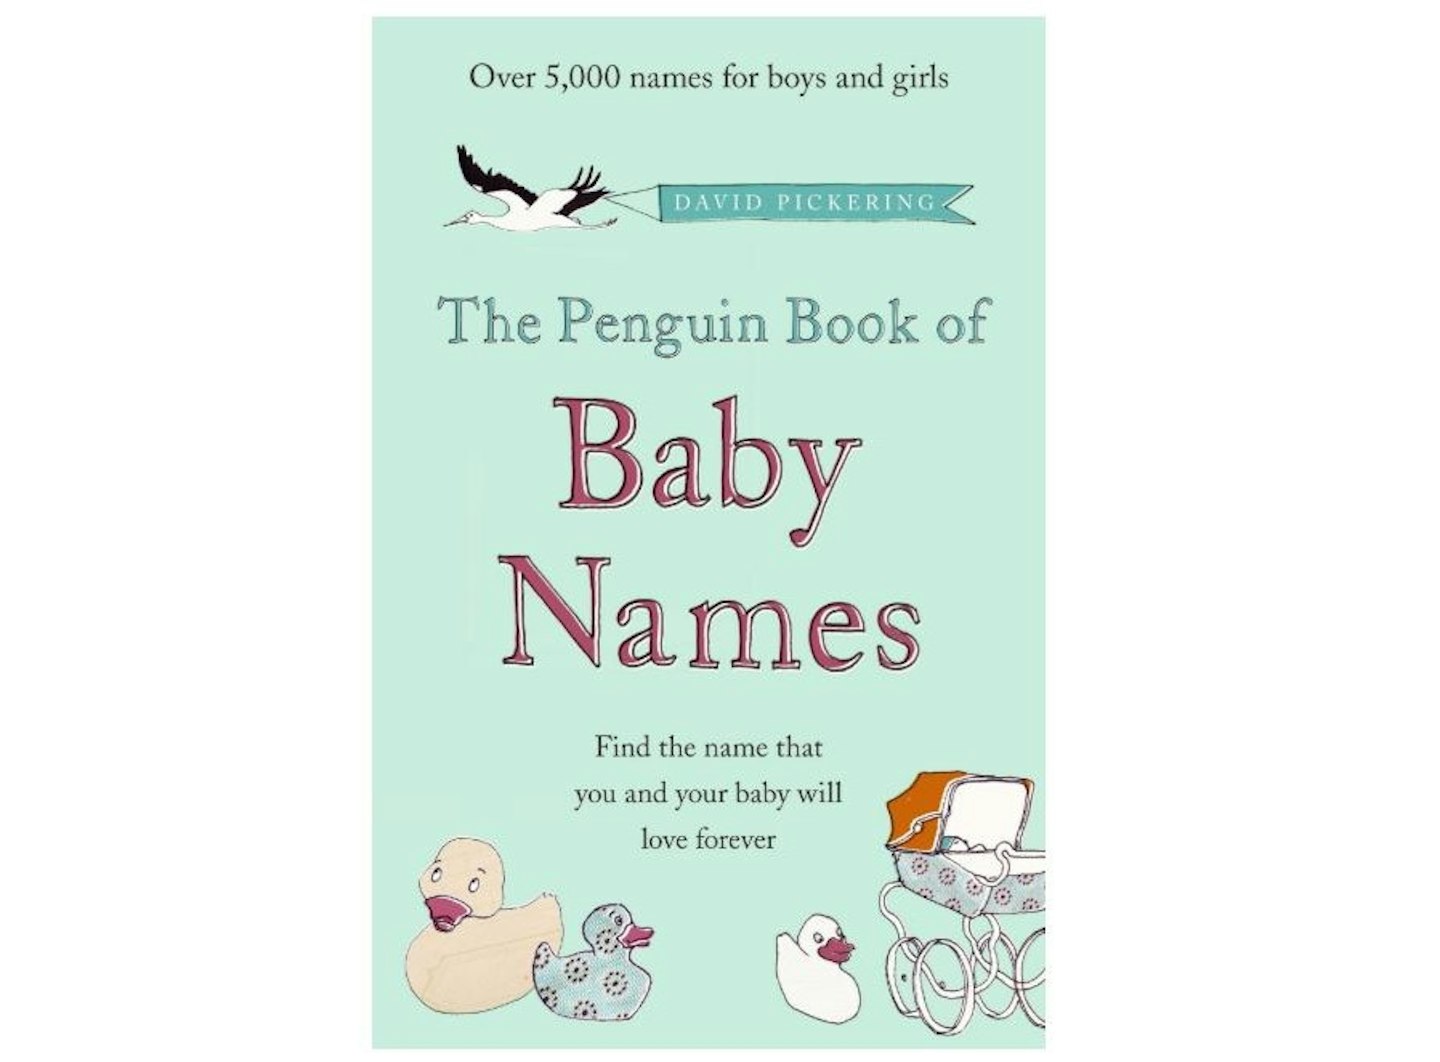 The Penguin Book of Baby Names, £4.84